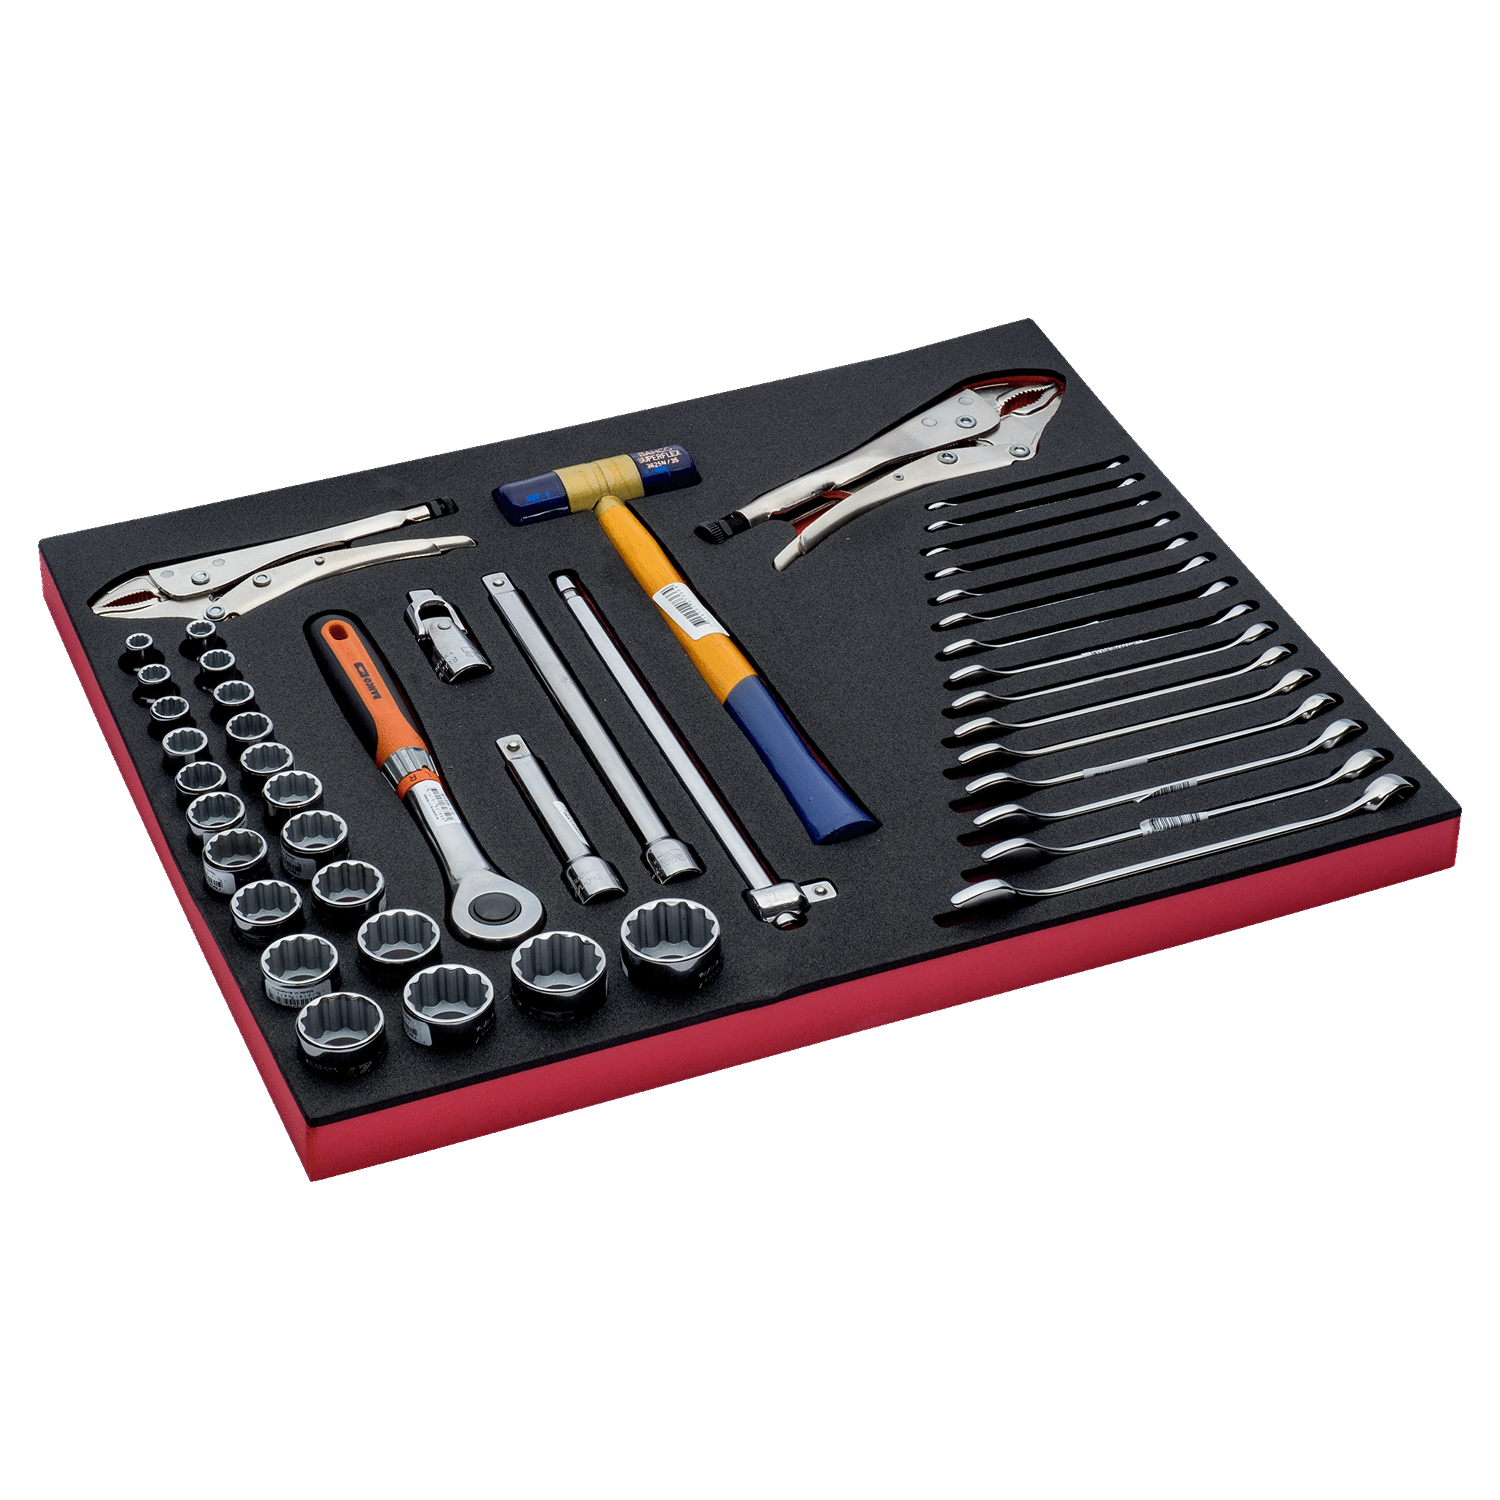 BAHCO FF1A5030 Fit&Go 3/3 Foam Inlay Socket/Wrench/ Grip Set - Premium Grip Set from BAHCO - Shop now at Yew Aik.